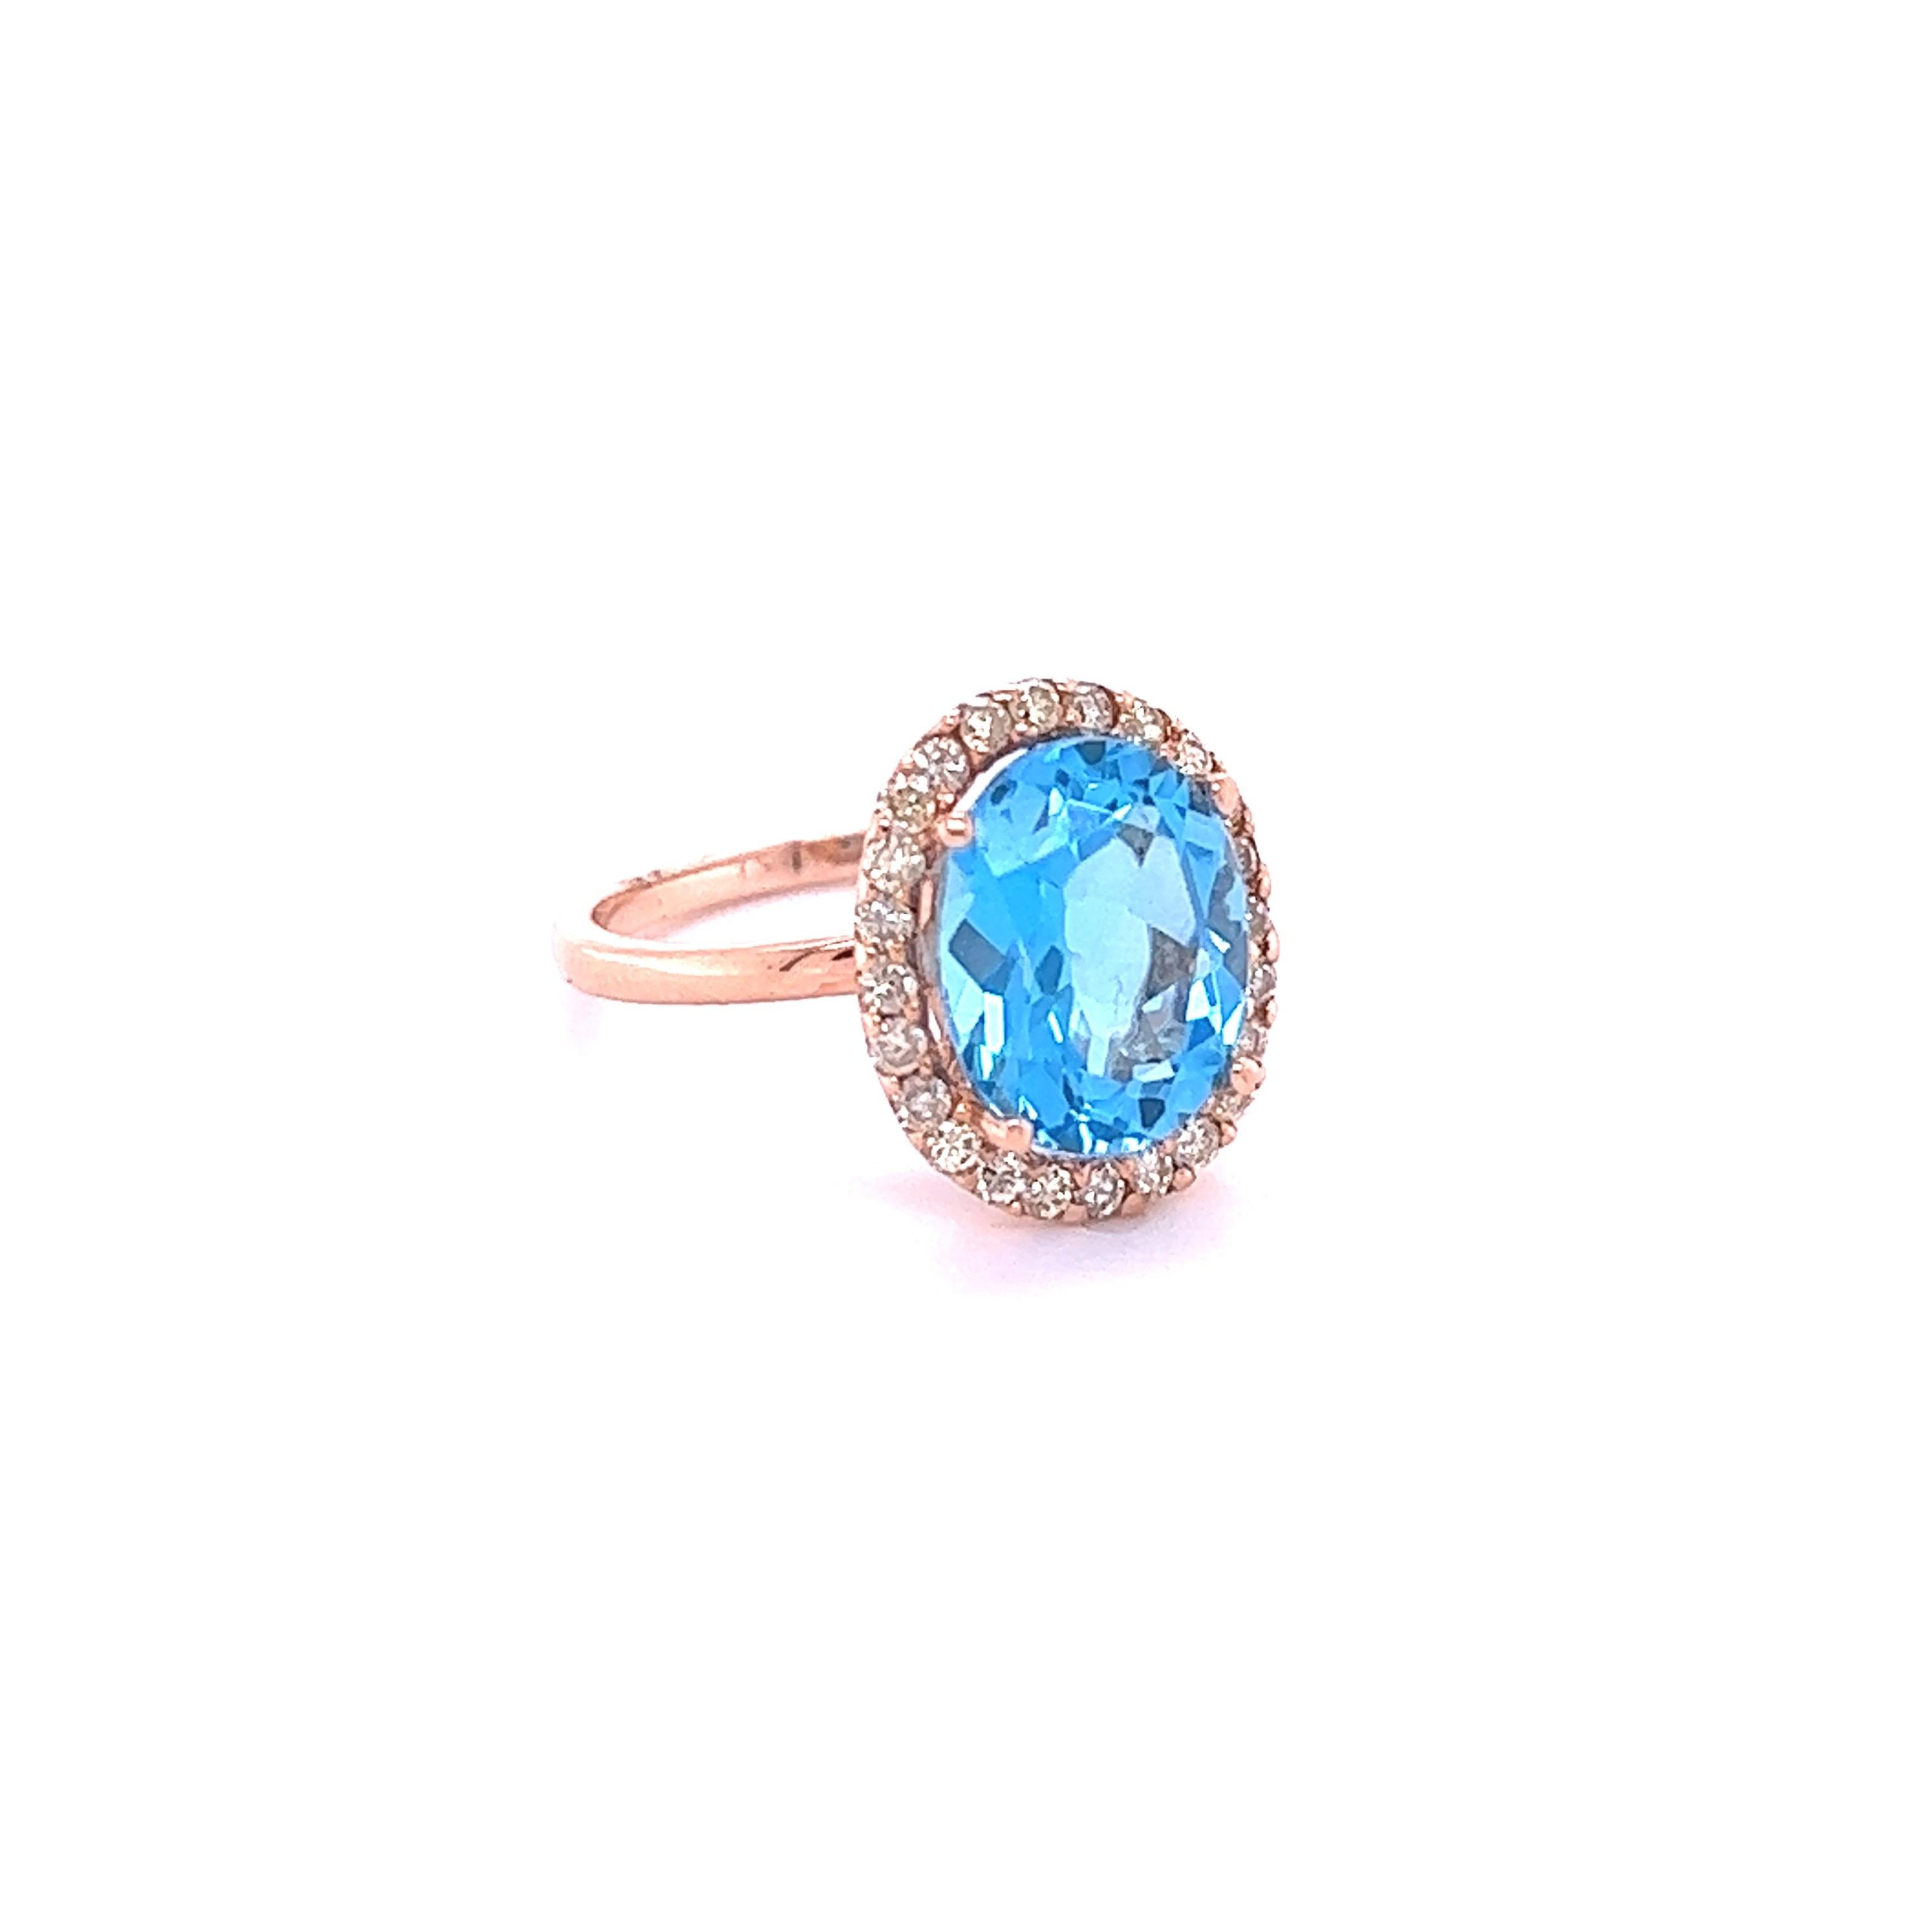 This ring has a Oval Cut Blue Topaz that weighs 4.21 carats and measures at 11 mm x 9 mm. 

It is surrounded by a simple halo of 24 Round Cut Diamonds that weigh 0.42 Carats. The total carat weight of the ring is 4.63 carats.

It is crafted in 14